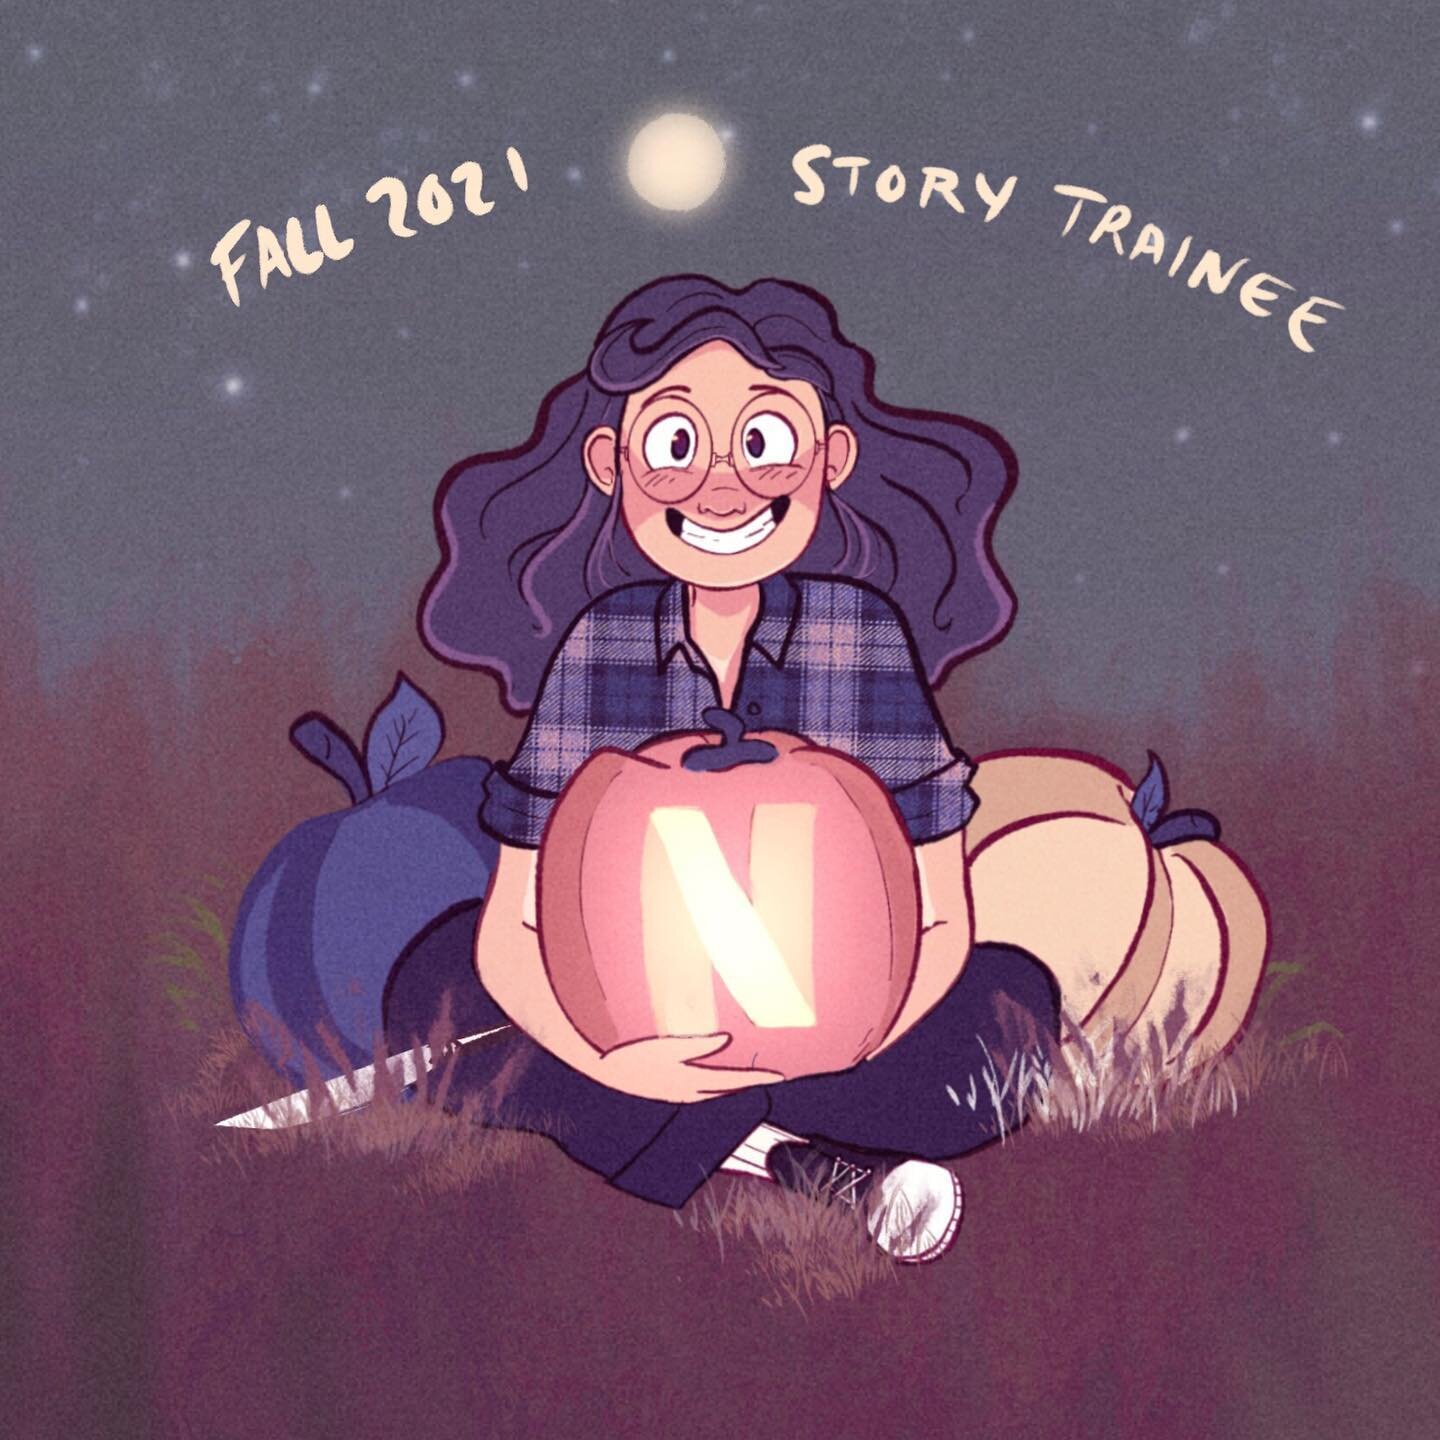 Since I signed something, I think I can come out and say it&hellip; I&rsquo;m really excited to share that I will be continuing my creative journey as a Story Trainee at Netflix Feature Animation! ✨It&rsquo;s honestly a dream come true. 

-

#story #